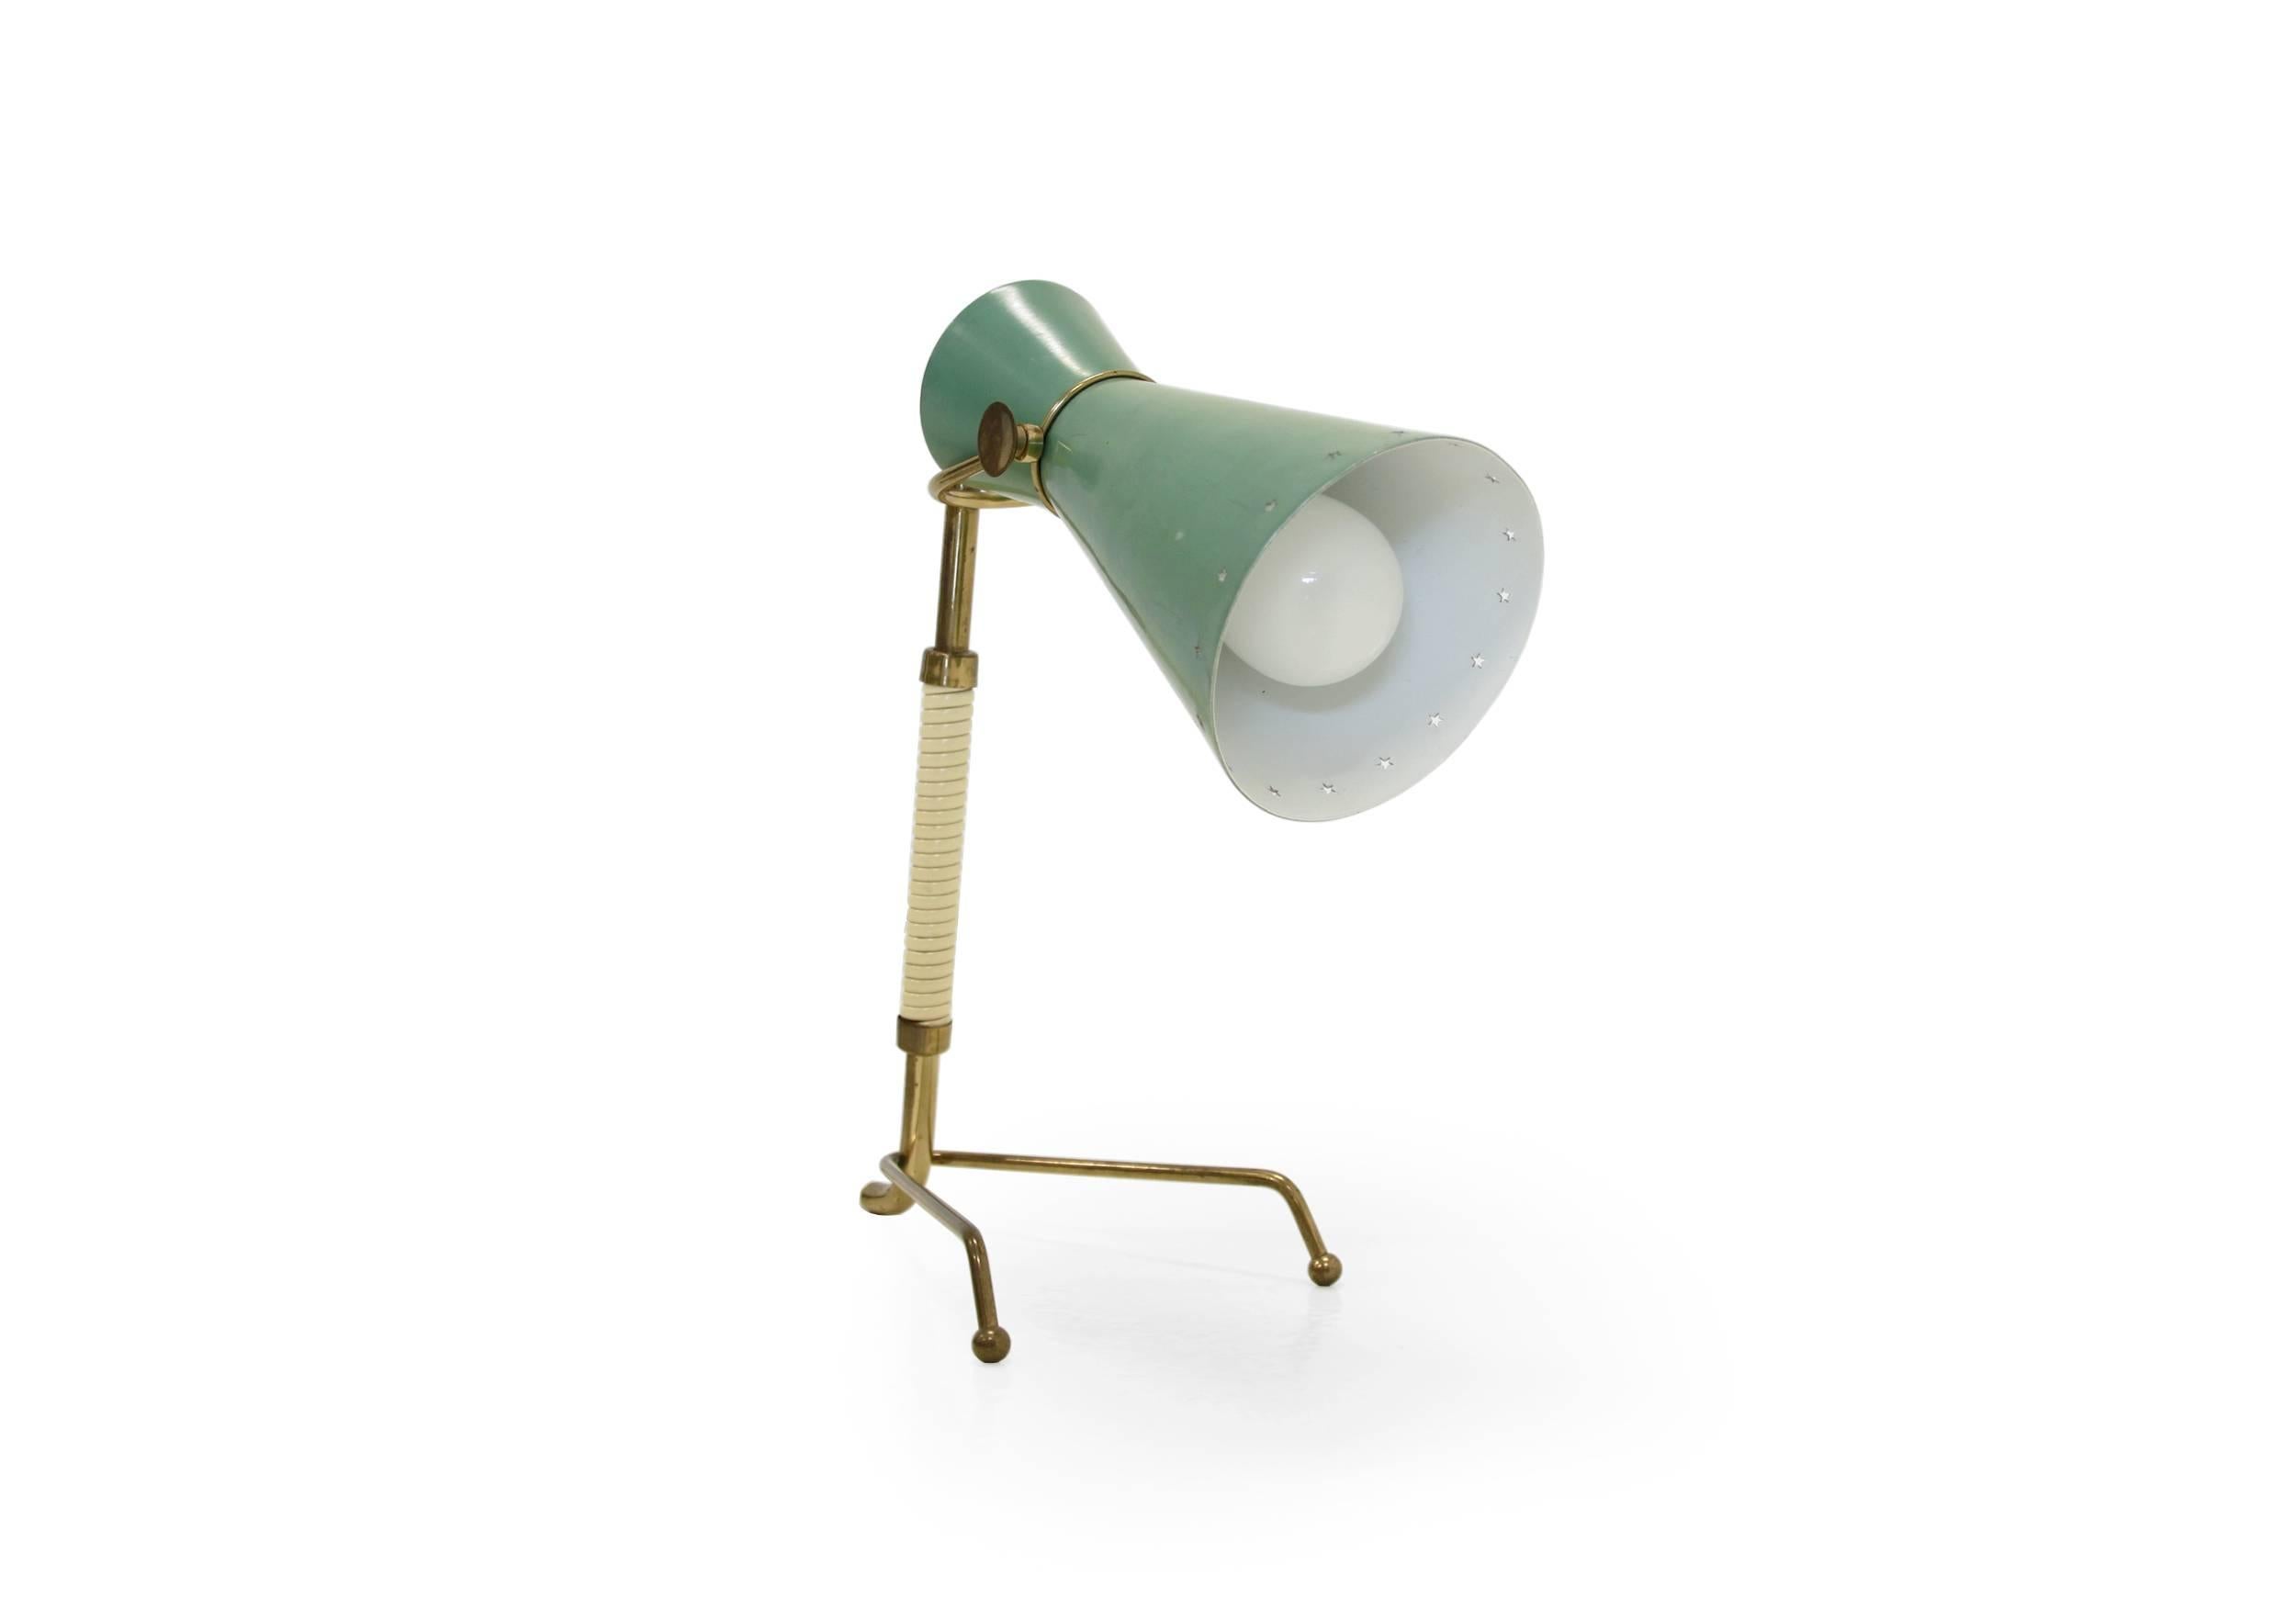 Rare and important table lamp on a brass frame and steel lamp shade.

Designed and manufactured in Norway by Arnold Wiigs Fabrikker AS fra 1950 first half.

The lamp rewired and in excellent vintage condition with some normal age related usage